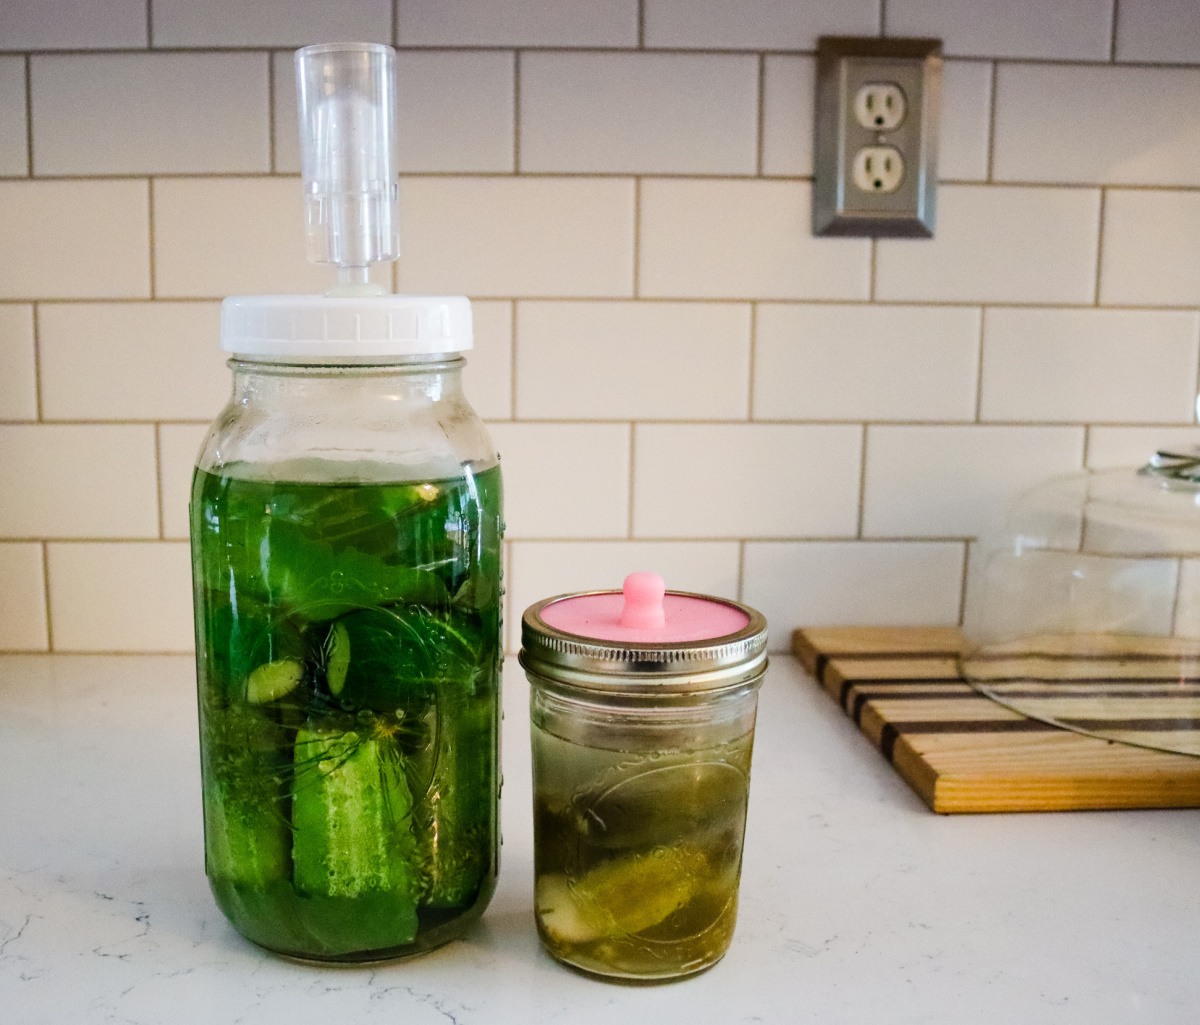 A half gallon and a pint jar filled with fermented pickles sitting on the counter.